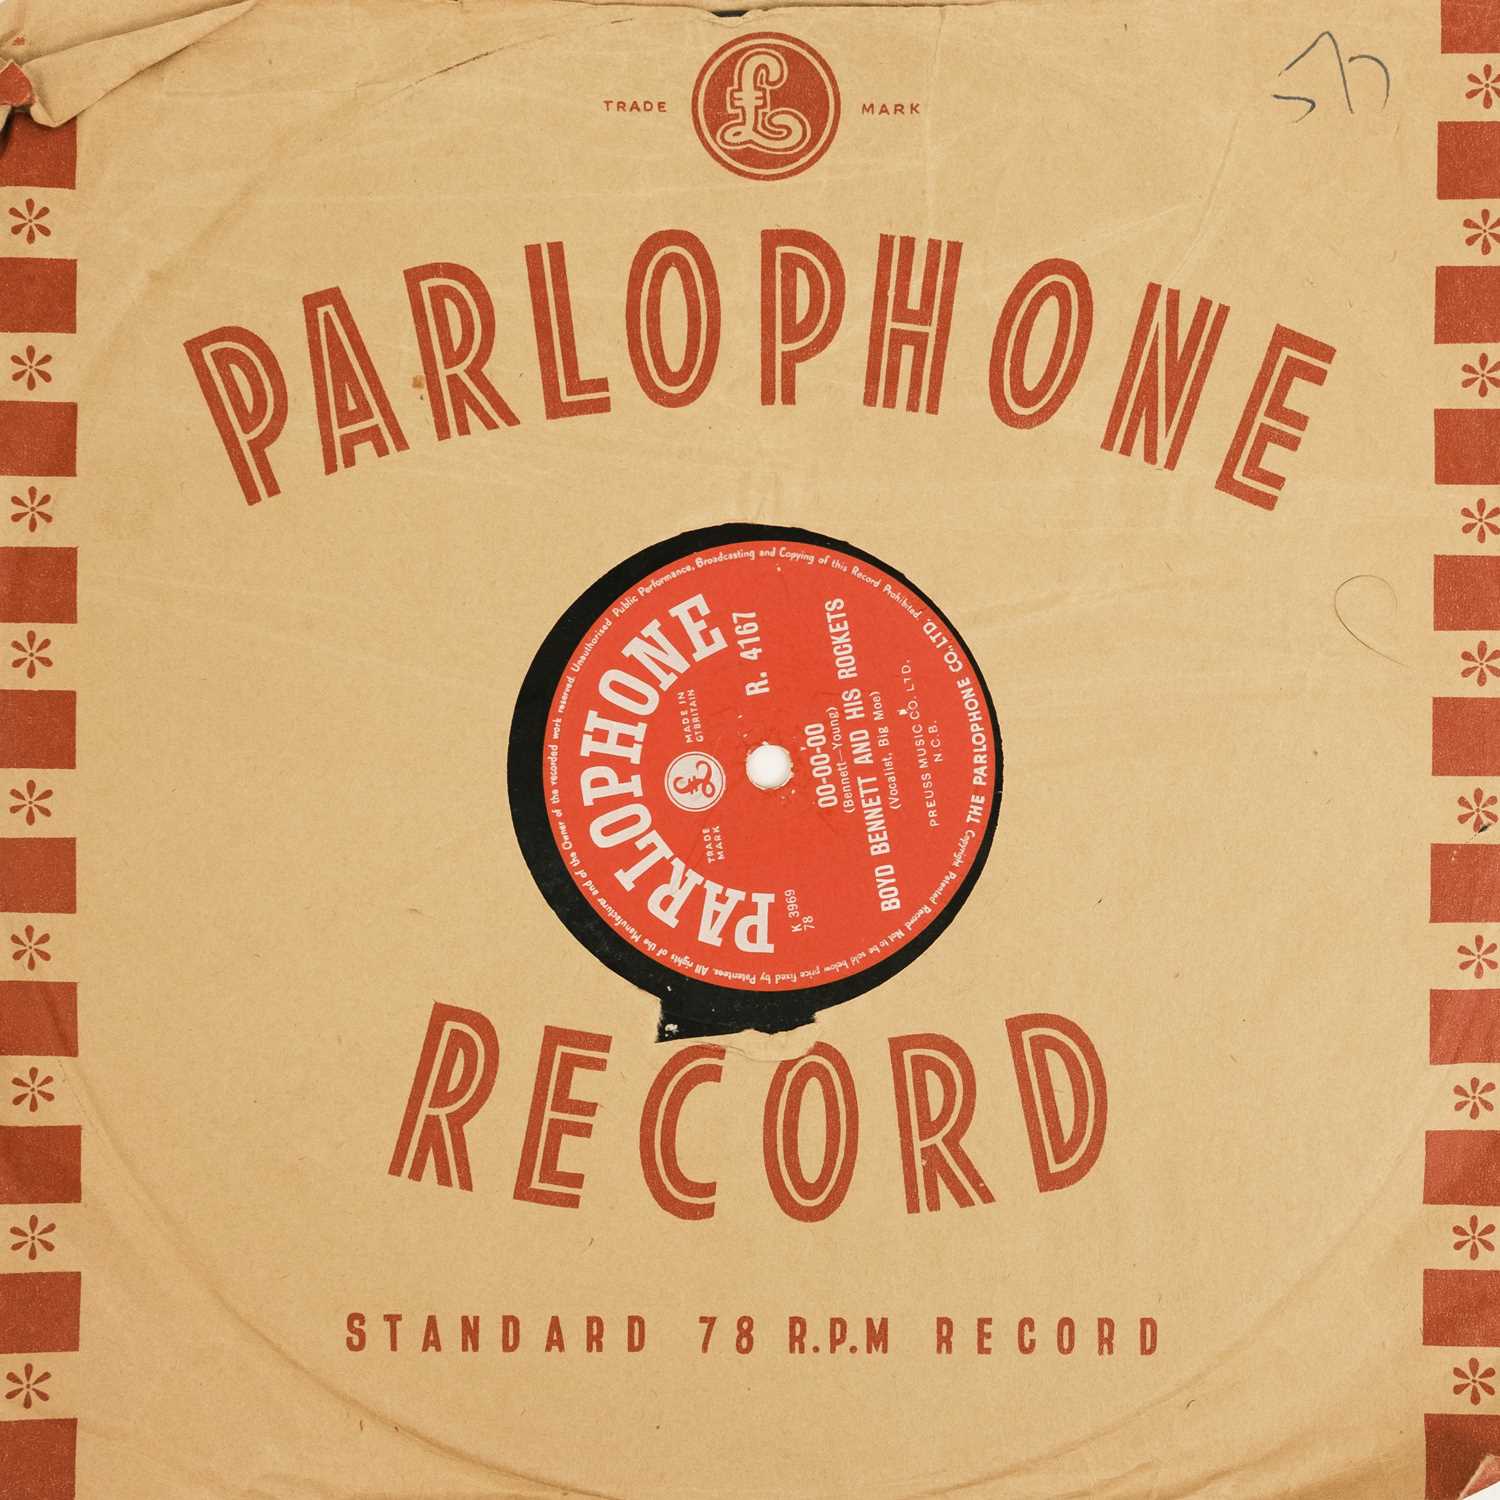 Rock & Roll 78rpm shellac. - Image 6 of 8